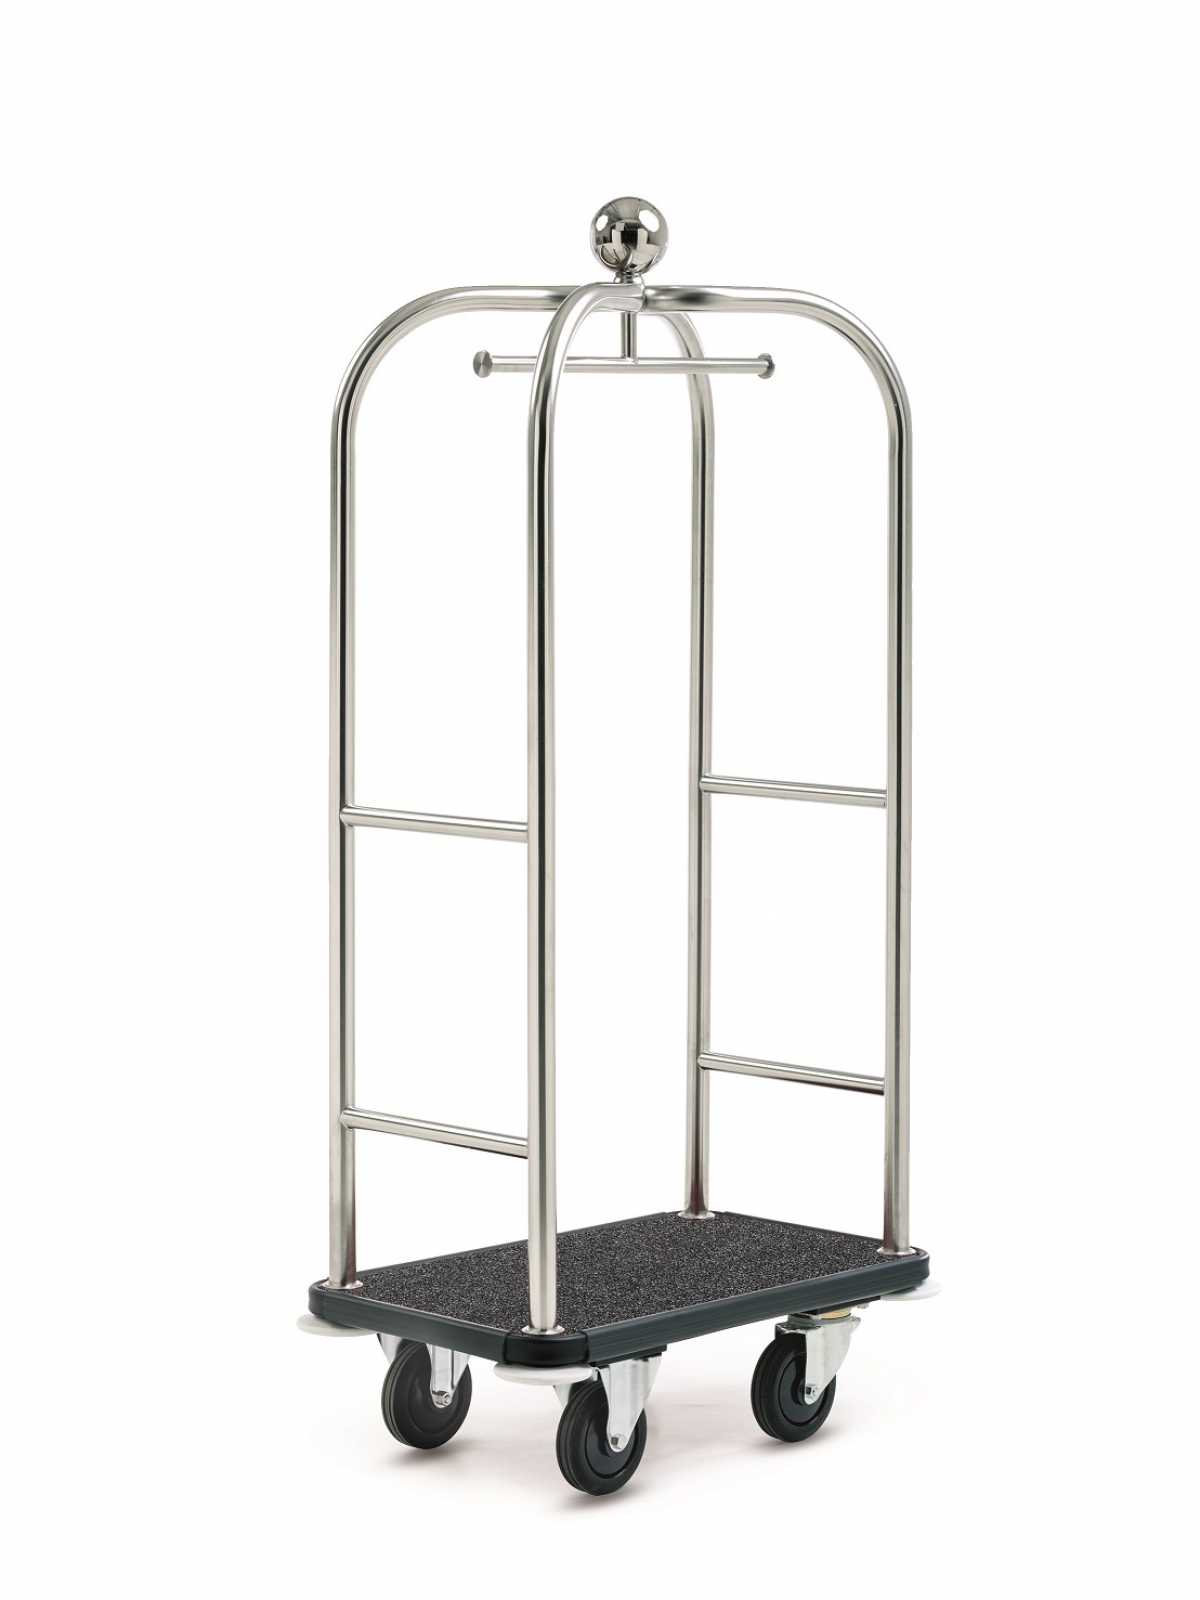 WANZL Luggage Collection Trolley GS-Lobby XS, Electro-polished stainless steel